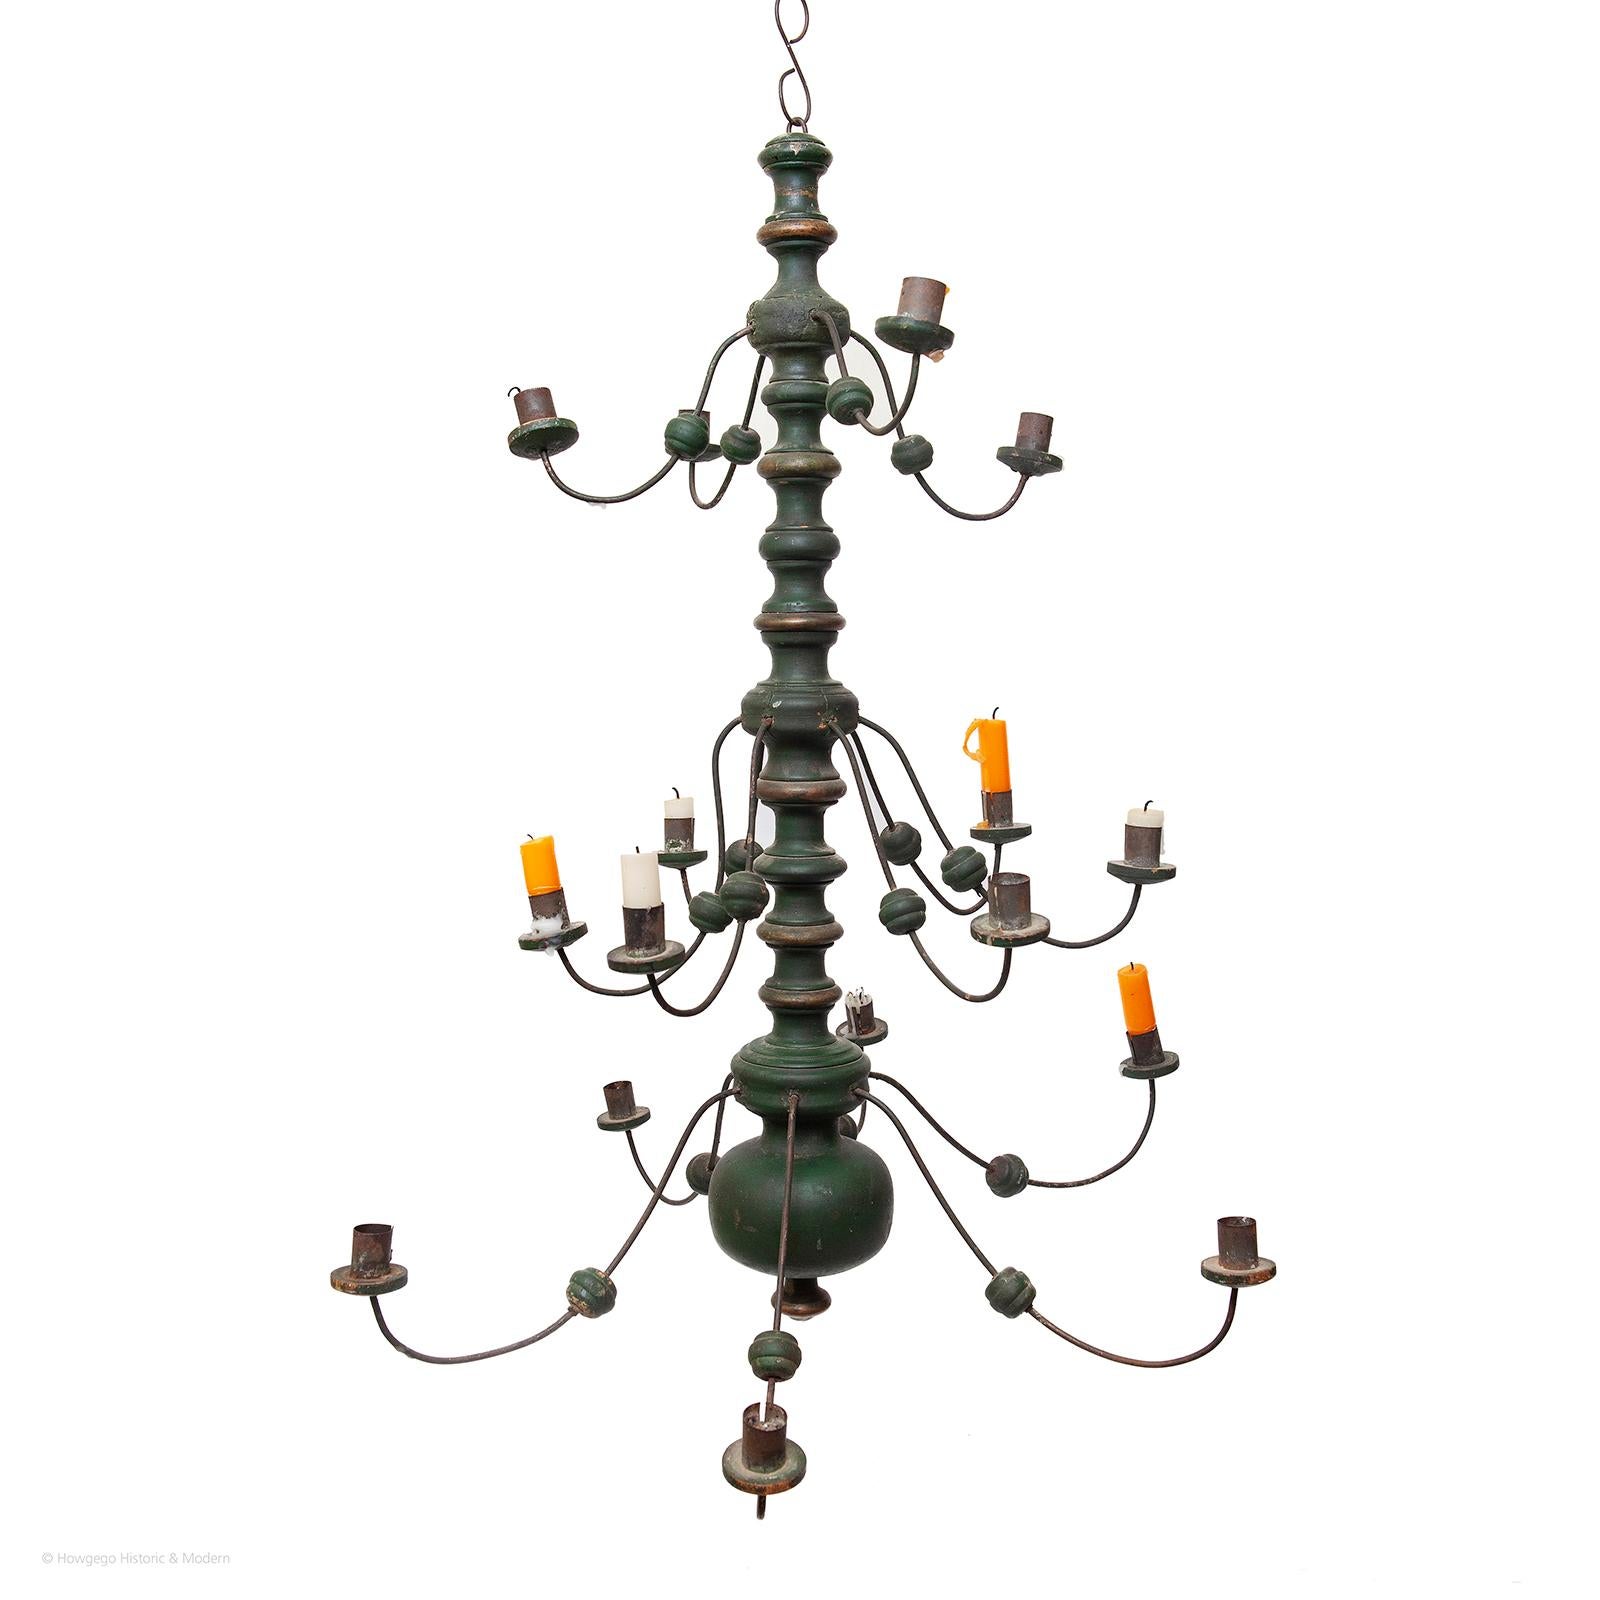 RARE FOLK OR VERNACULAR, 19TH CENTURY, GREEN PAINTED AND GILDED, 3 TIER, CHANDELIER WITH 16 BRANCHES OR ARMS, 76cm., 30” high

Exudes folk/vernacular charm, character and atmosphere
Three tier, folk chandeliers are rare as most were made for